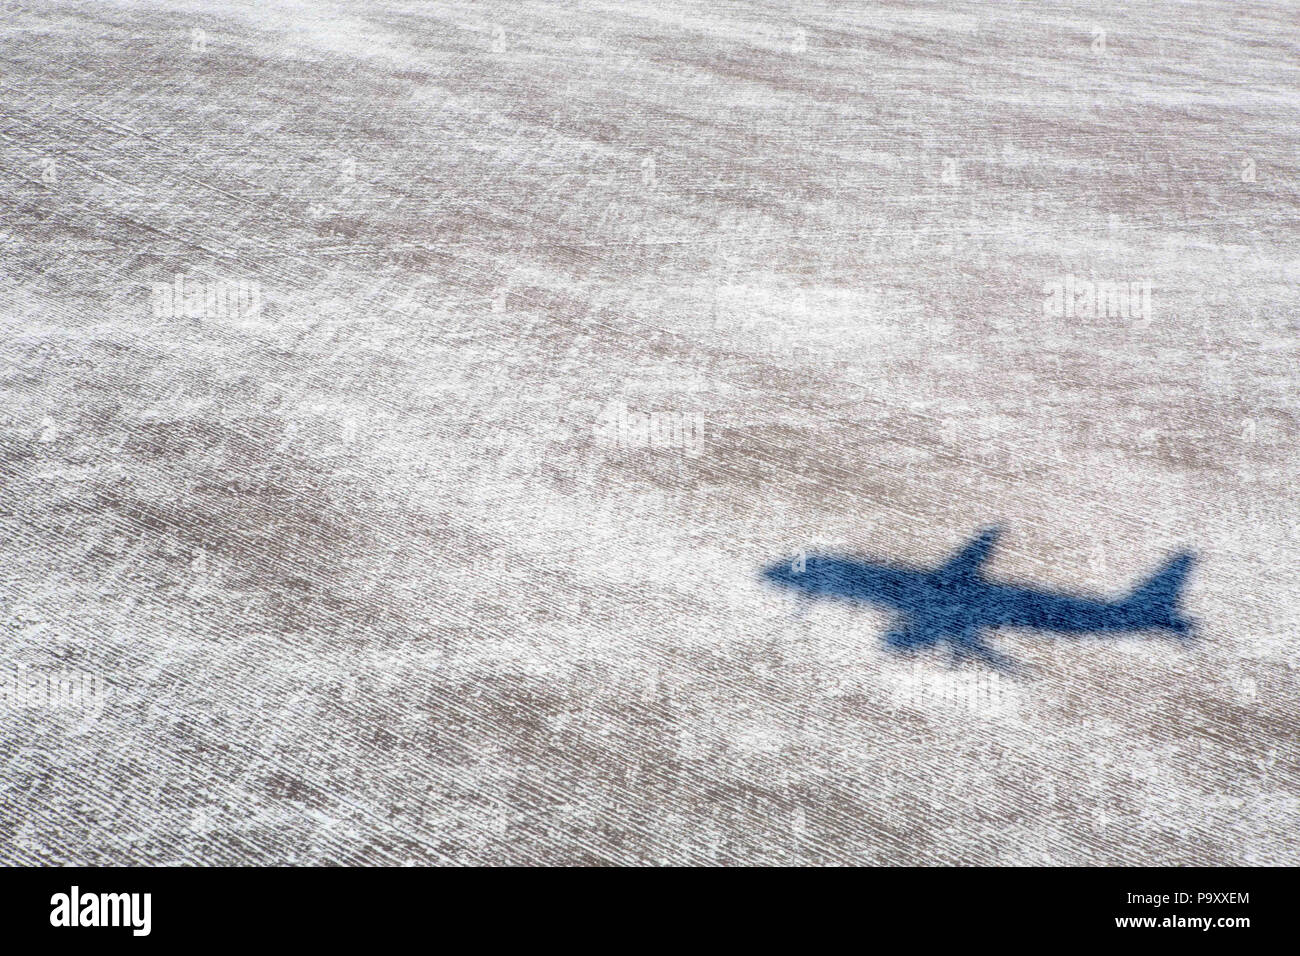 A civil aircraft drops a shadow on a snow-covered field under the jet's final approach path Stock Photo